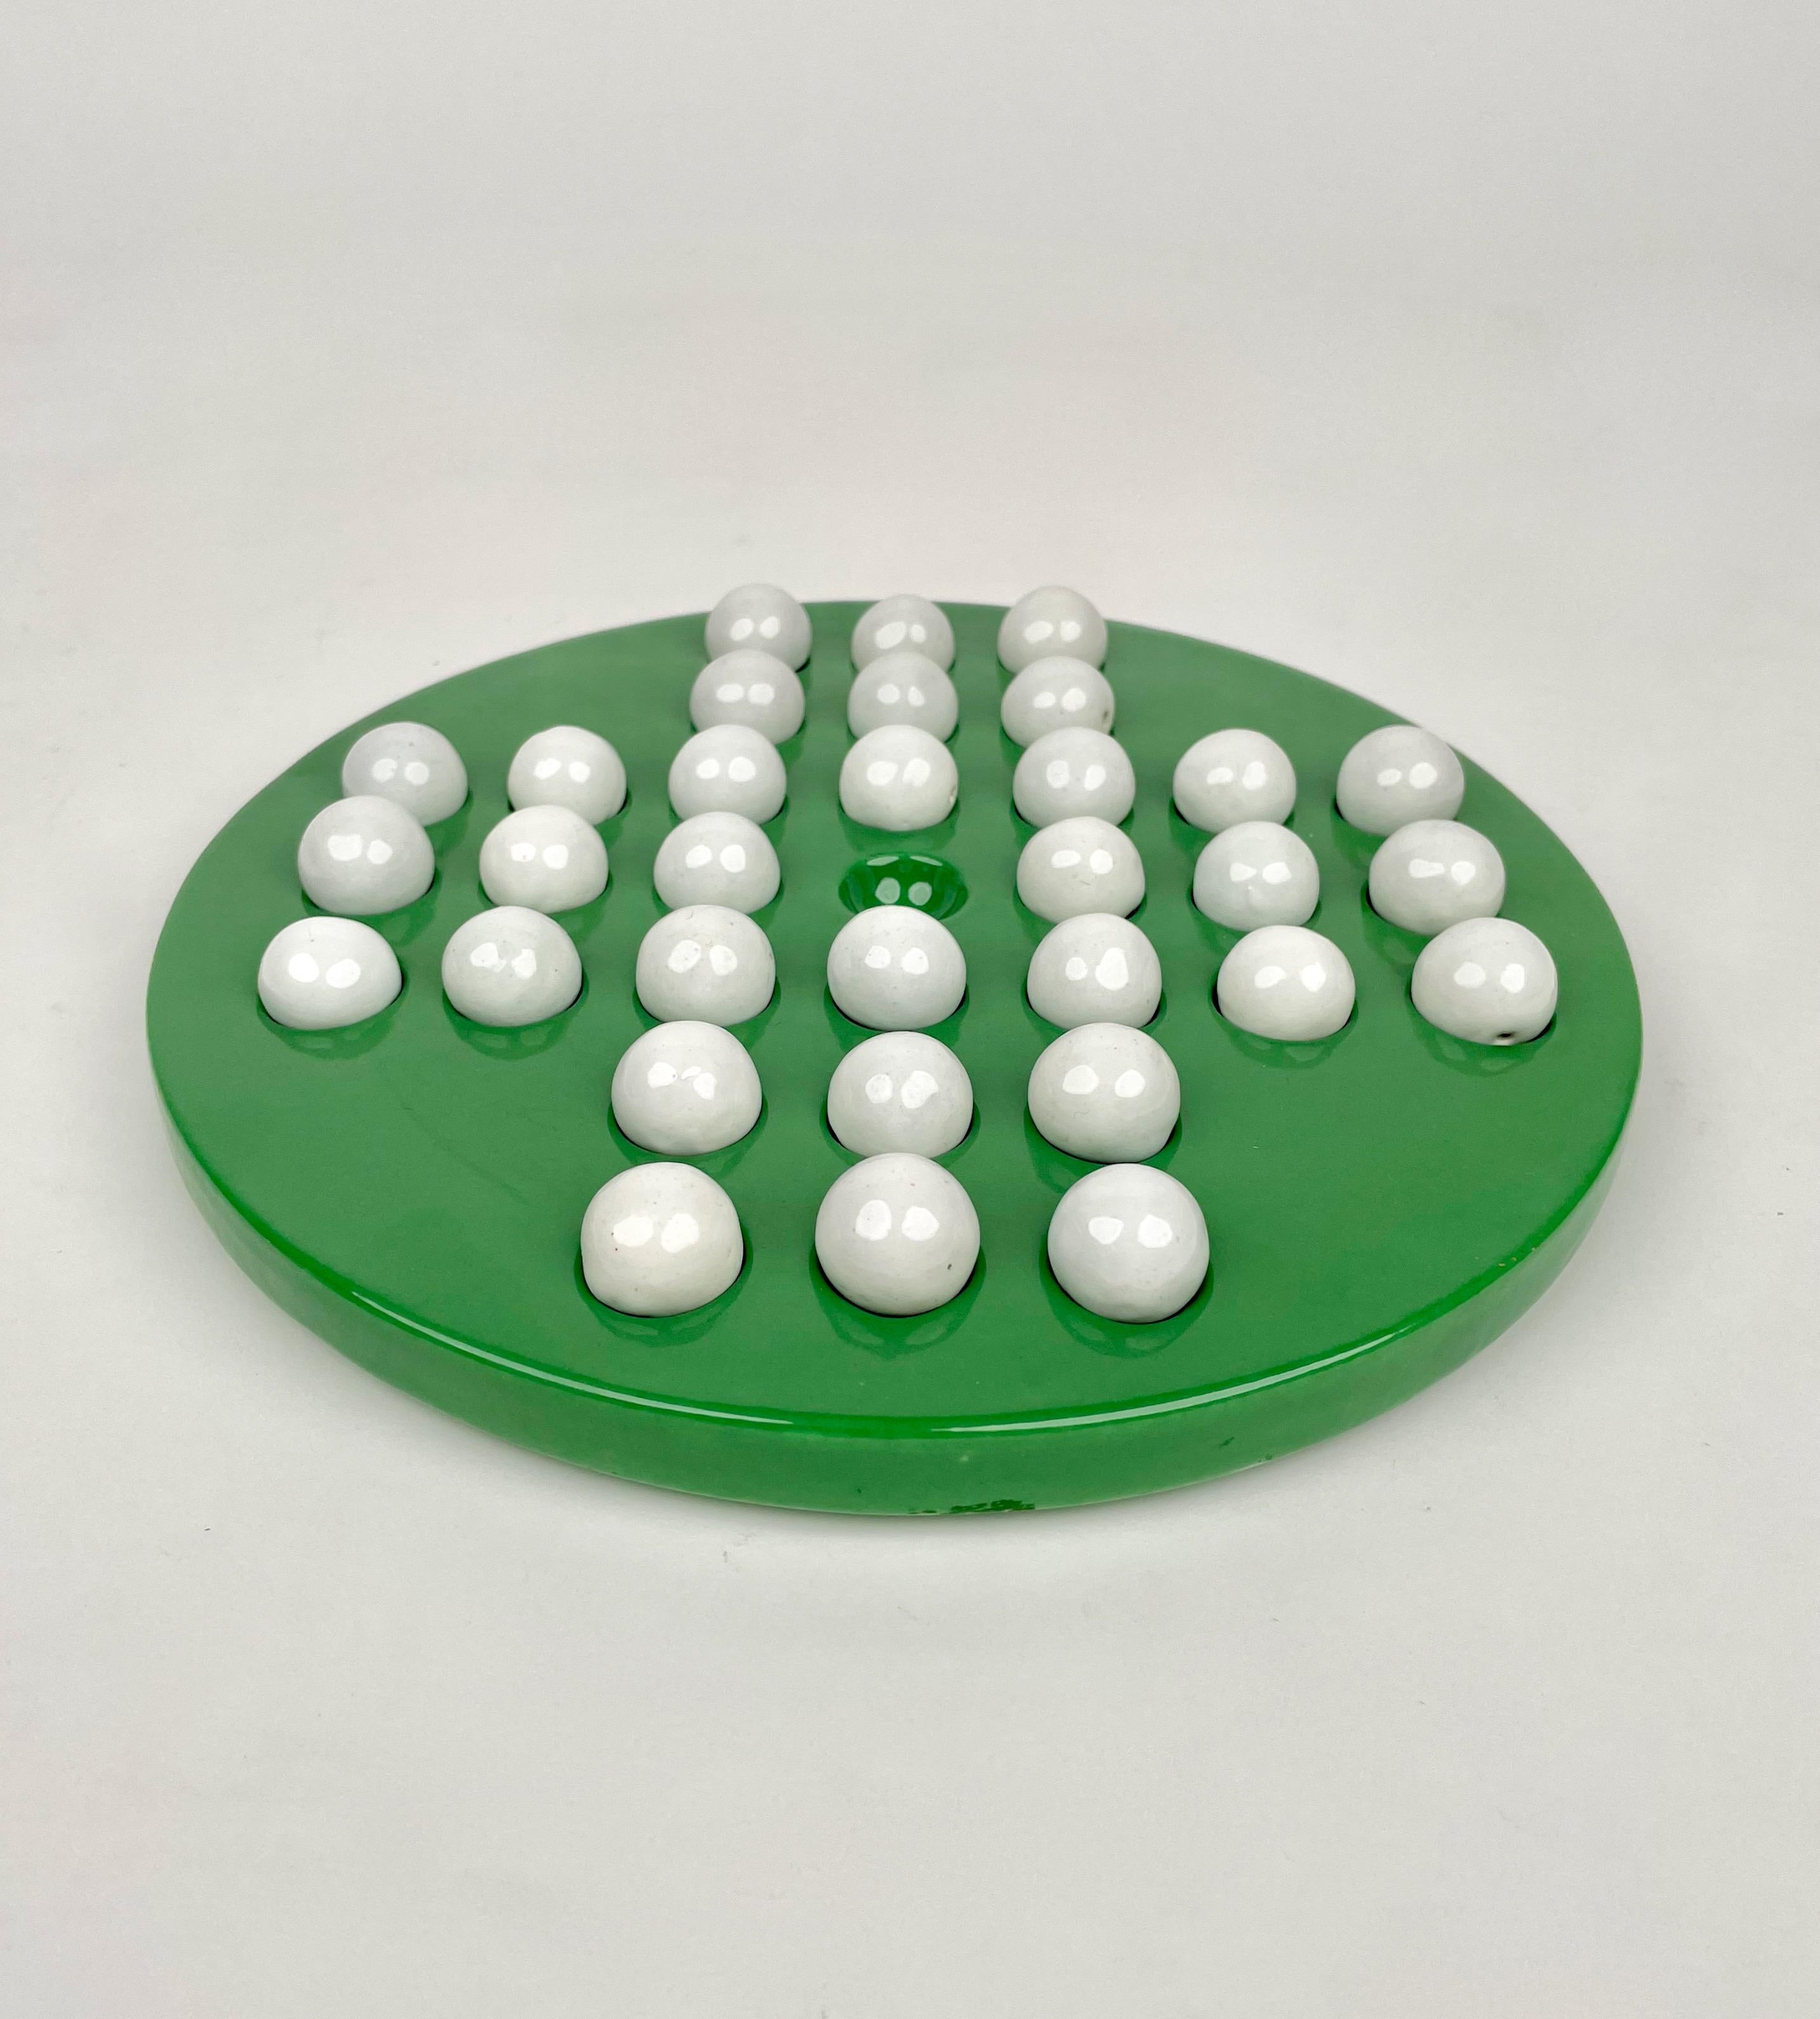 Checkers Game by Ennio Lucini for Gabbianelli Green & White Ceramic, Italy 1970s For Sale 3